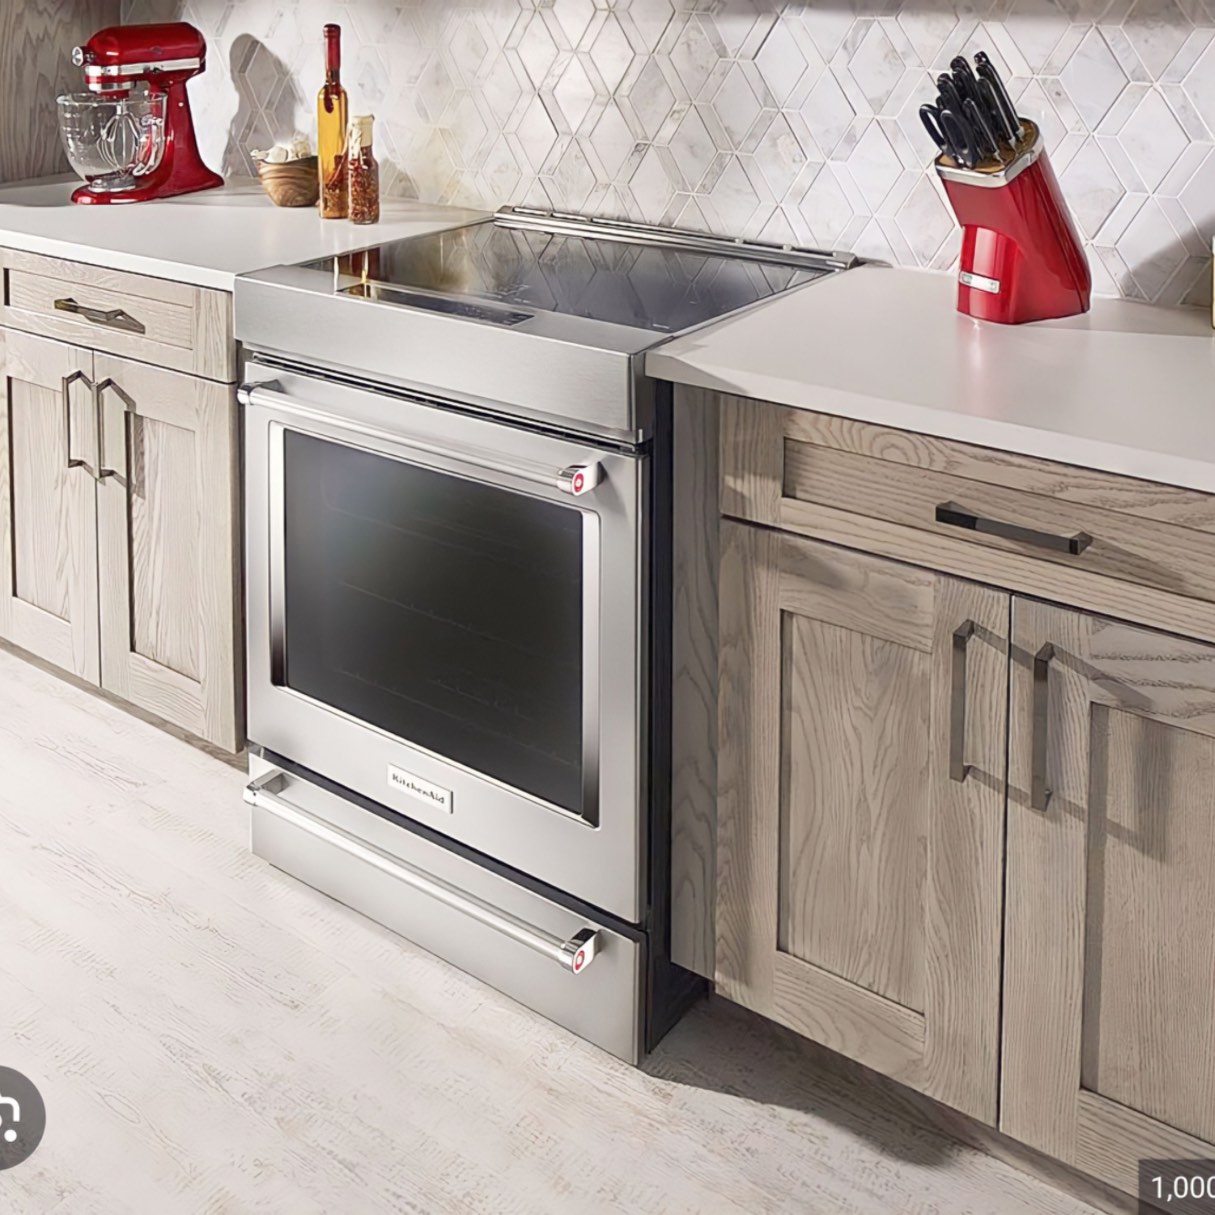 How To Turn On Kitchenaid Induction Stove Top